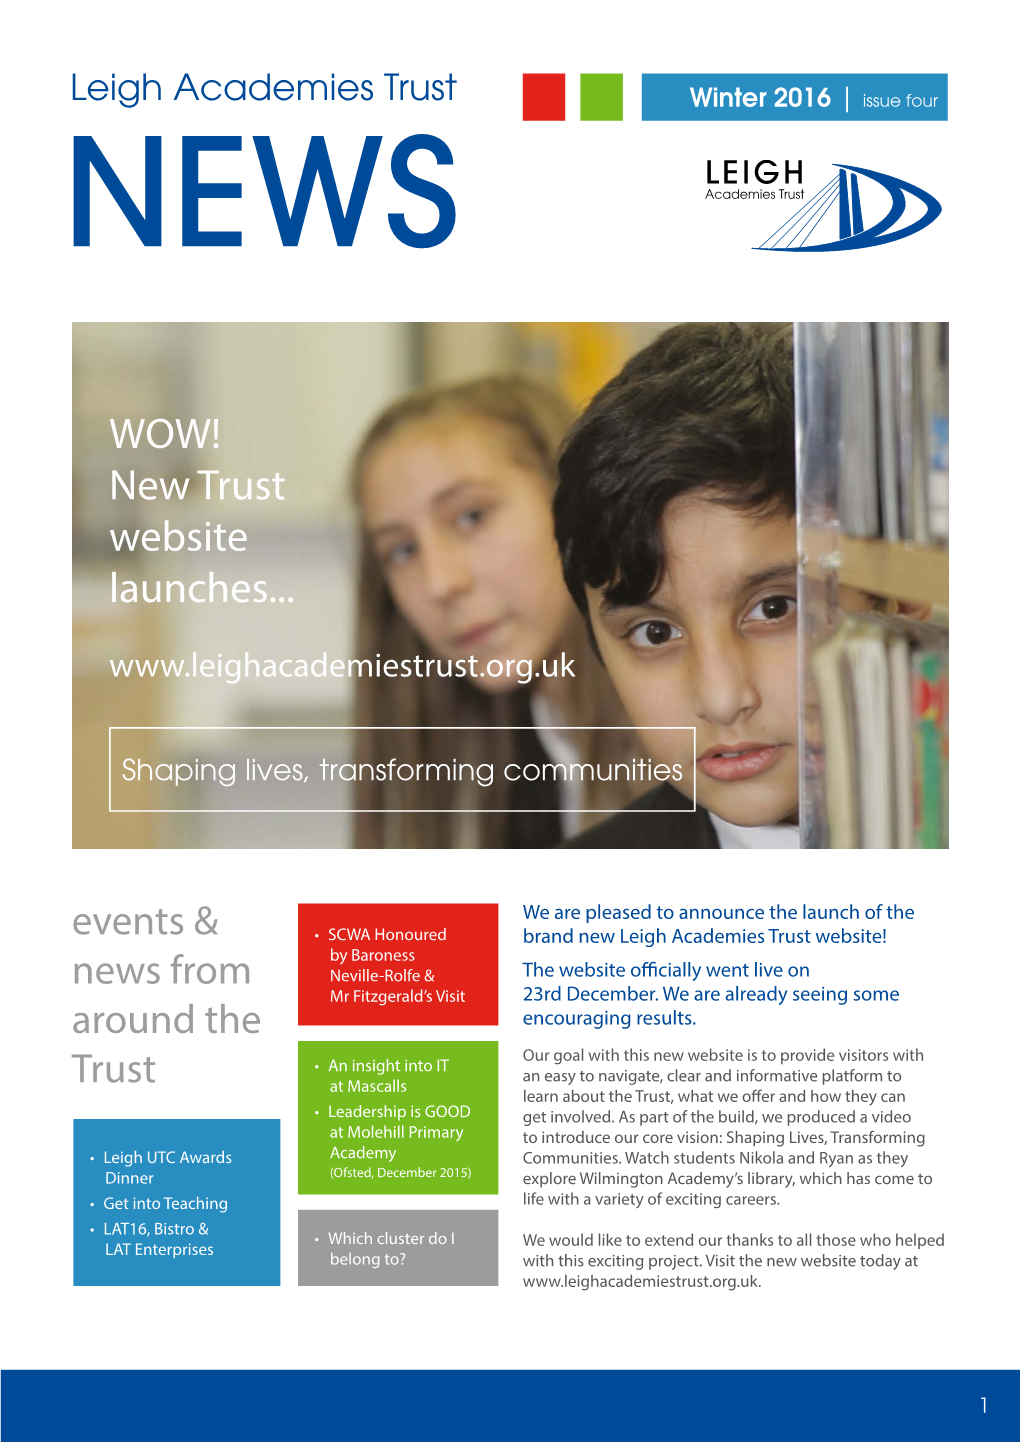 WOW! New Trust Website Launches